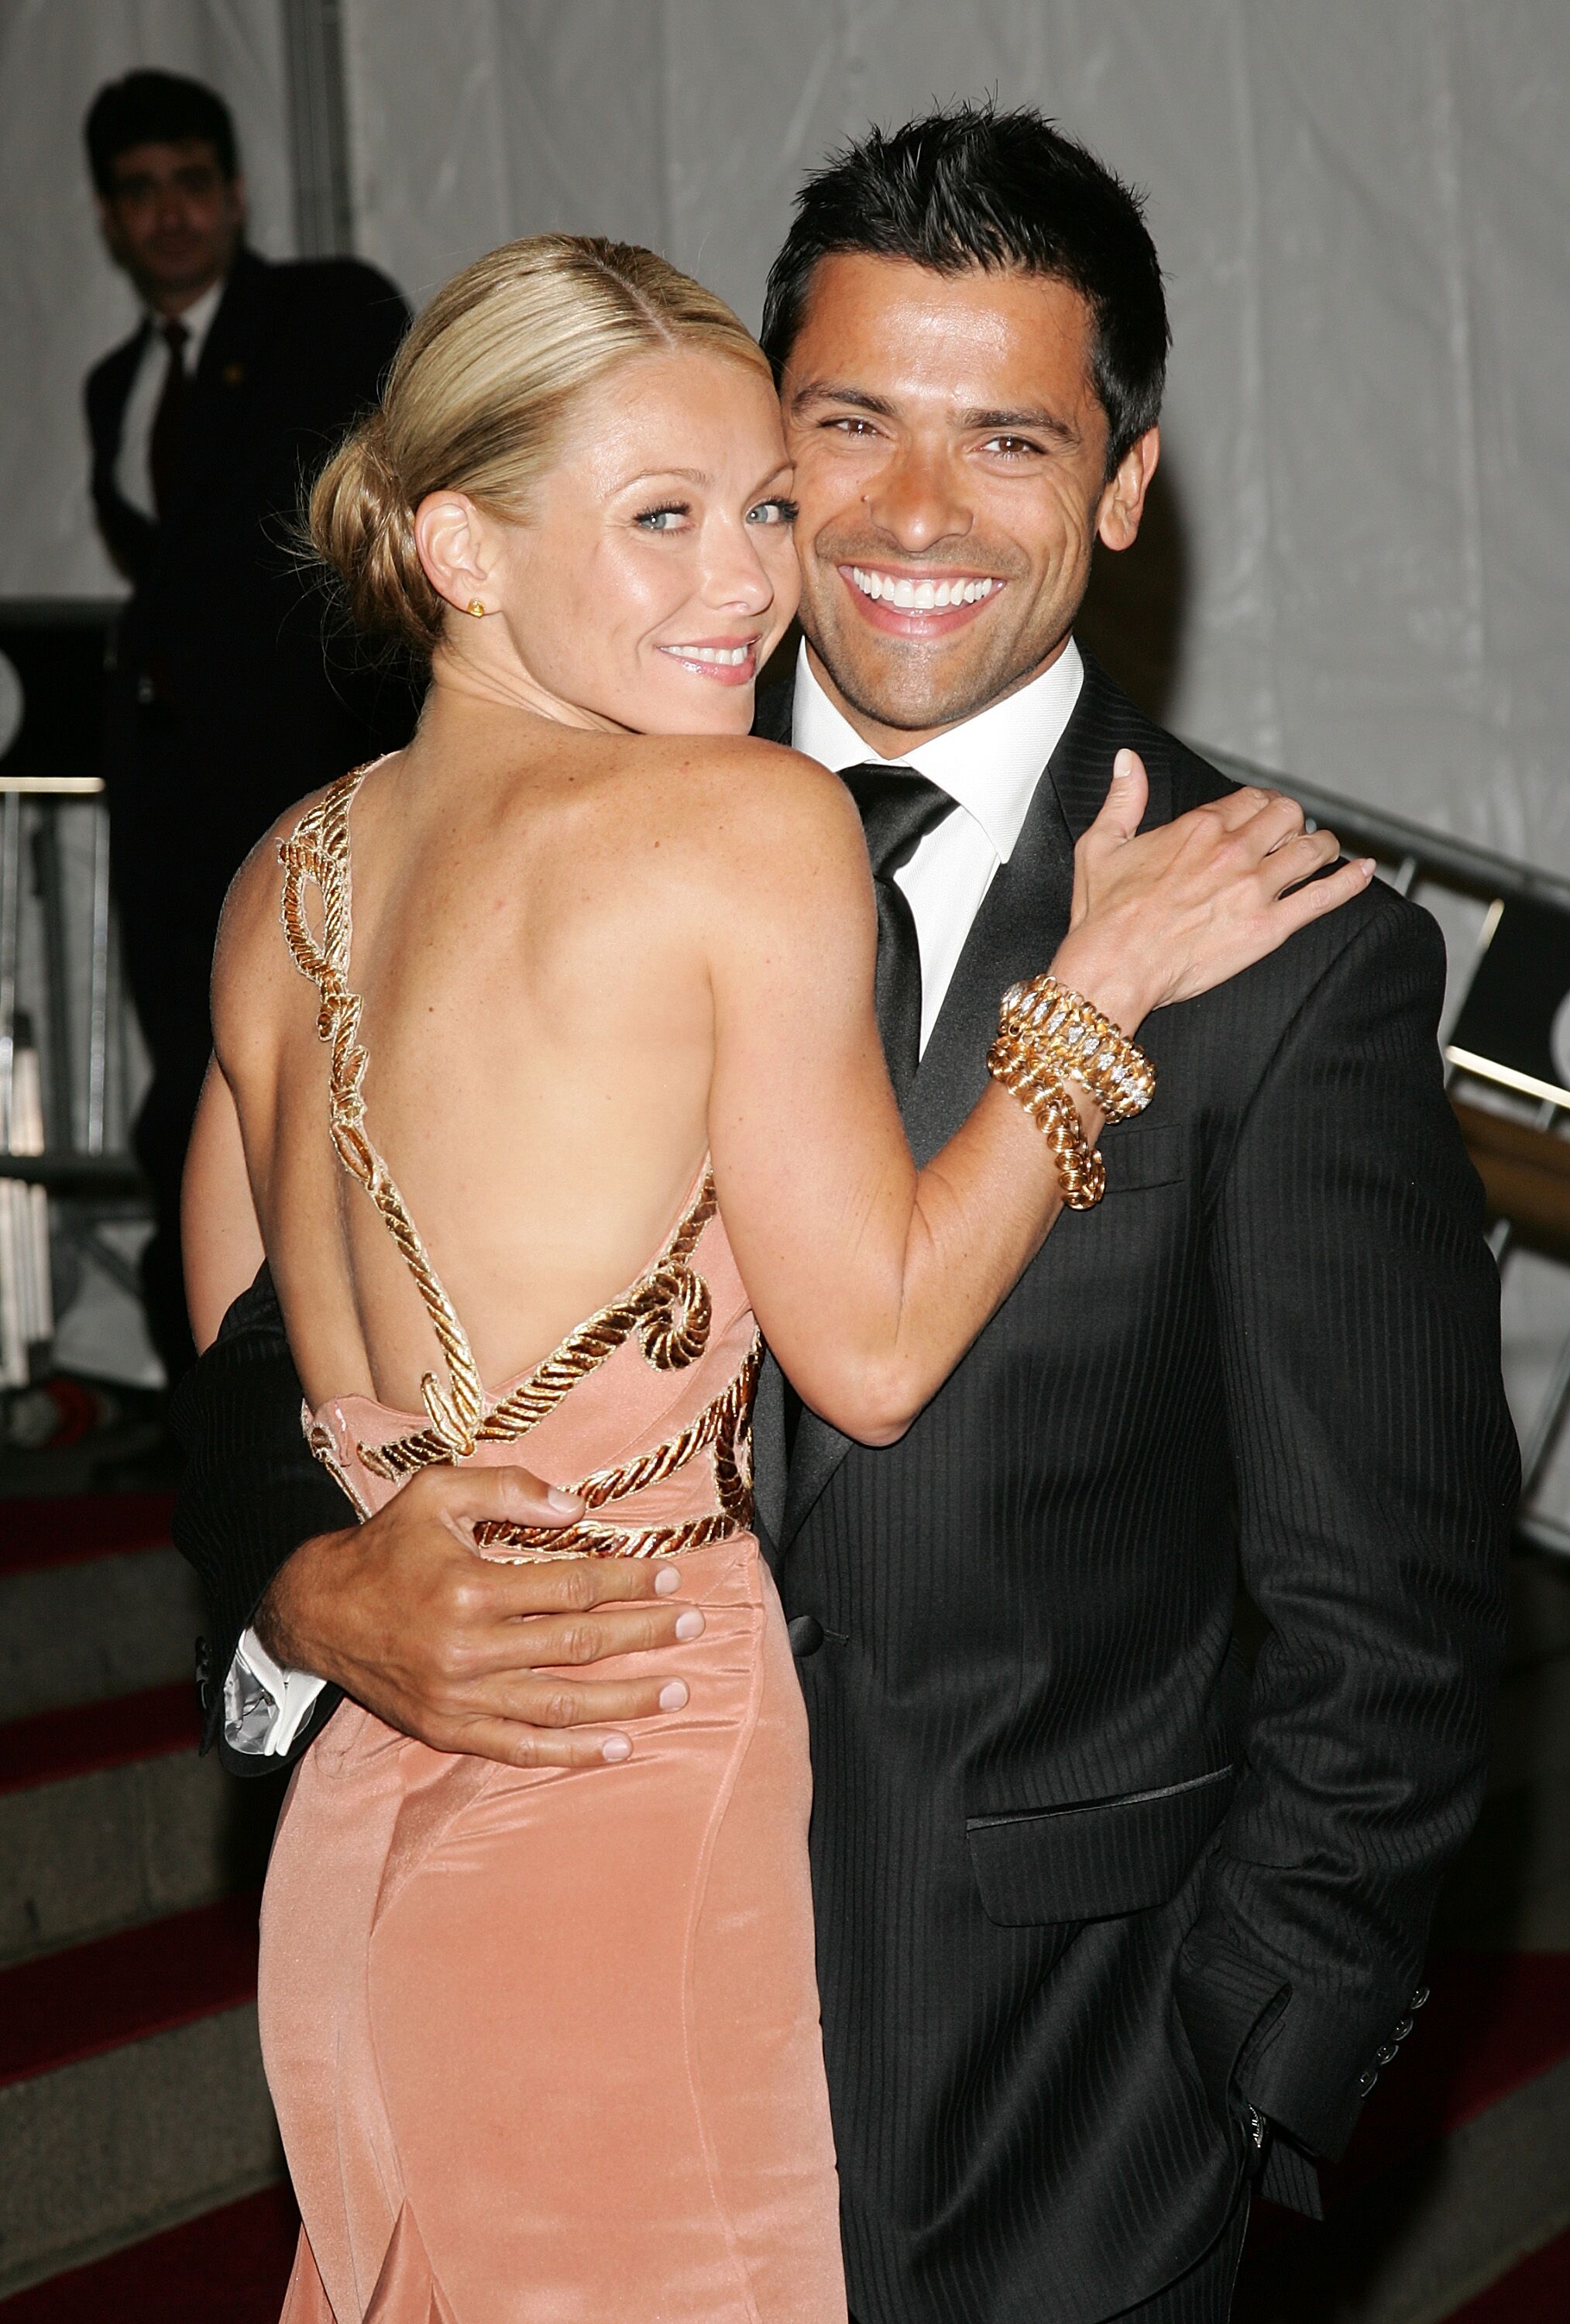 Kelly Ripa and husband actor Mark Consuelos at The Metropolitan Museum of Art's Costume Institute Gala May 07, 2007. | Source: Getty Images